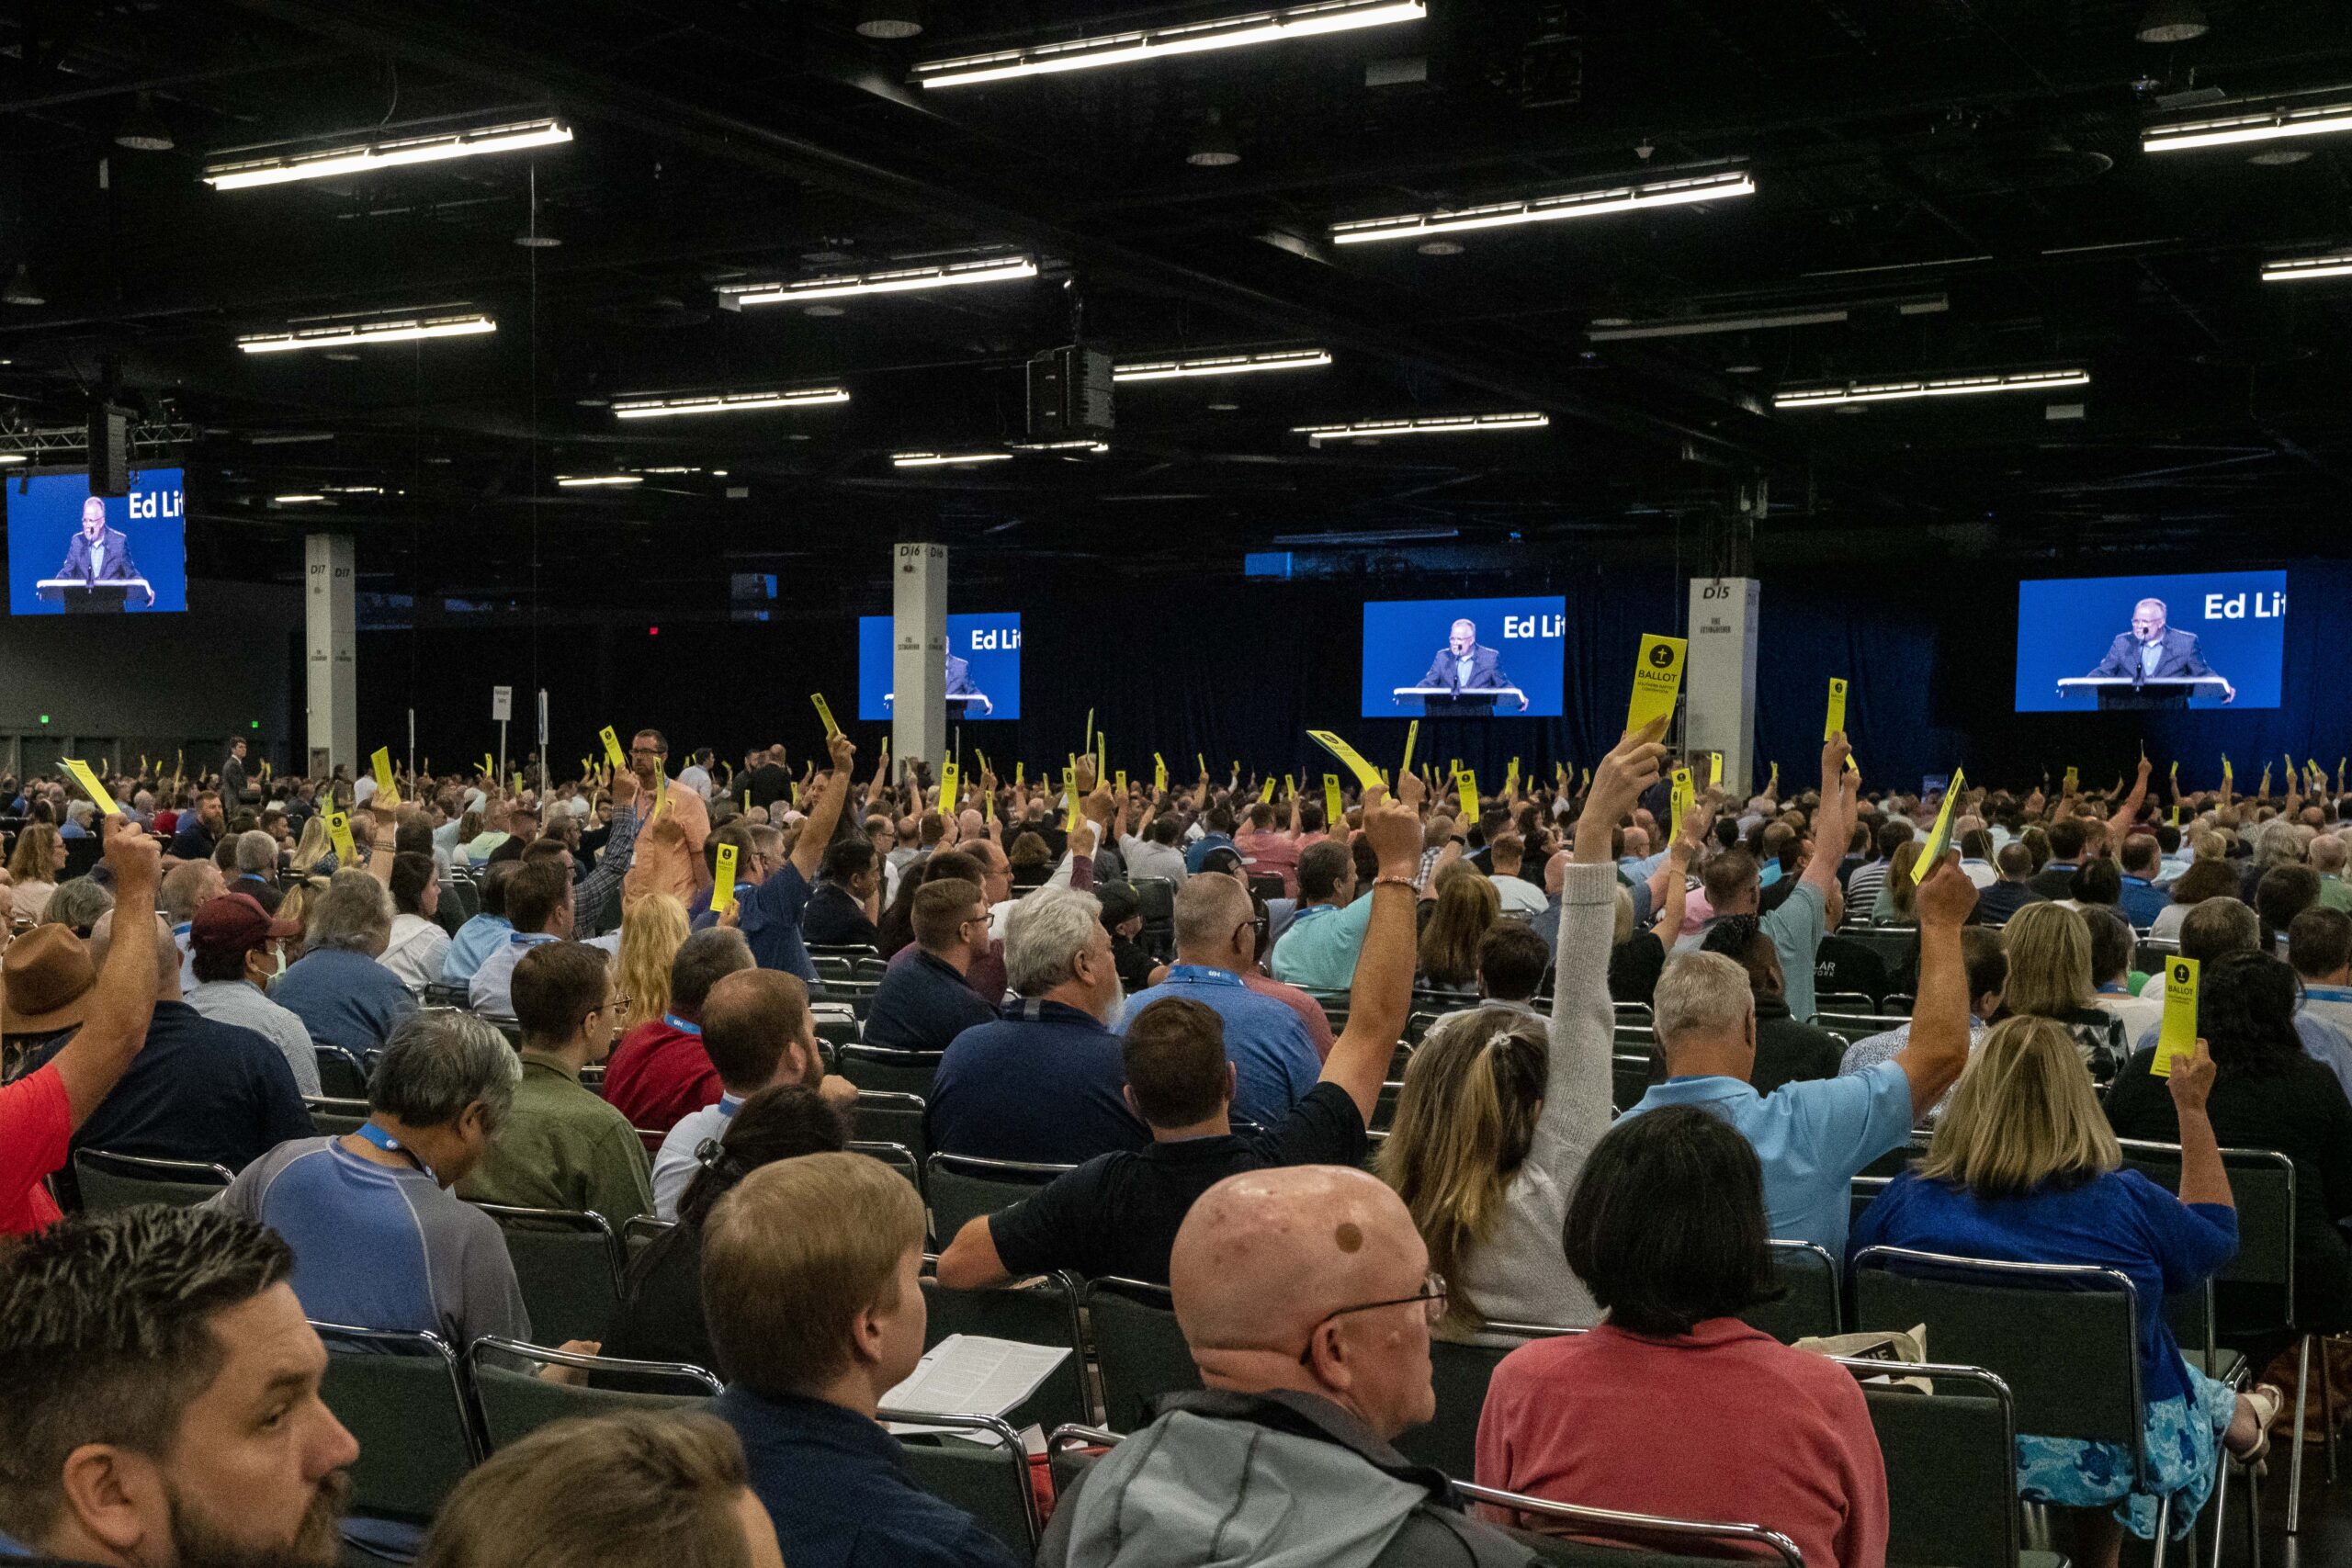 People vote in opposition of abolishing the Ethic and Religious Liberty Commission at the Southern Baptist Convention annual meeting, held at the Anaheim Convention Center in Anaheim, California, on Wednesday, June 15, 2022. Photo by Justin L. Stewart/Religion News Service